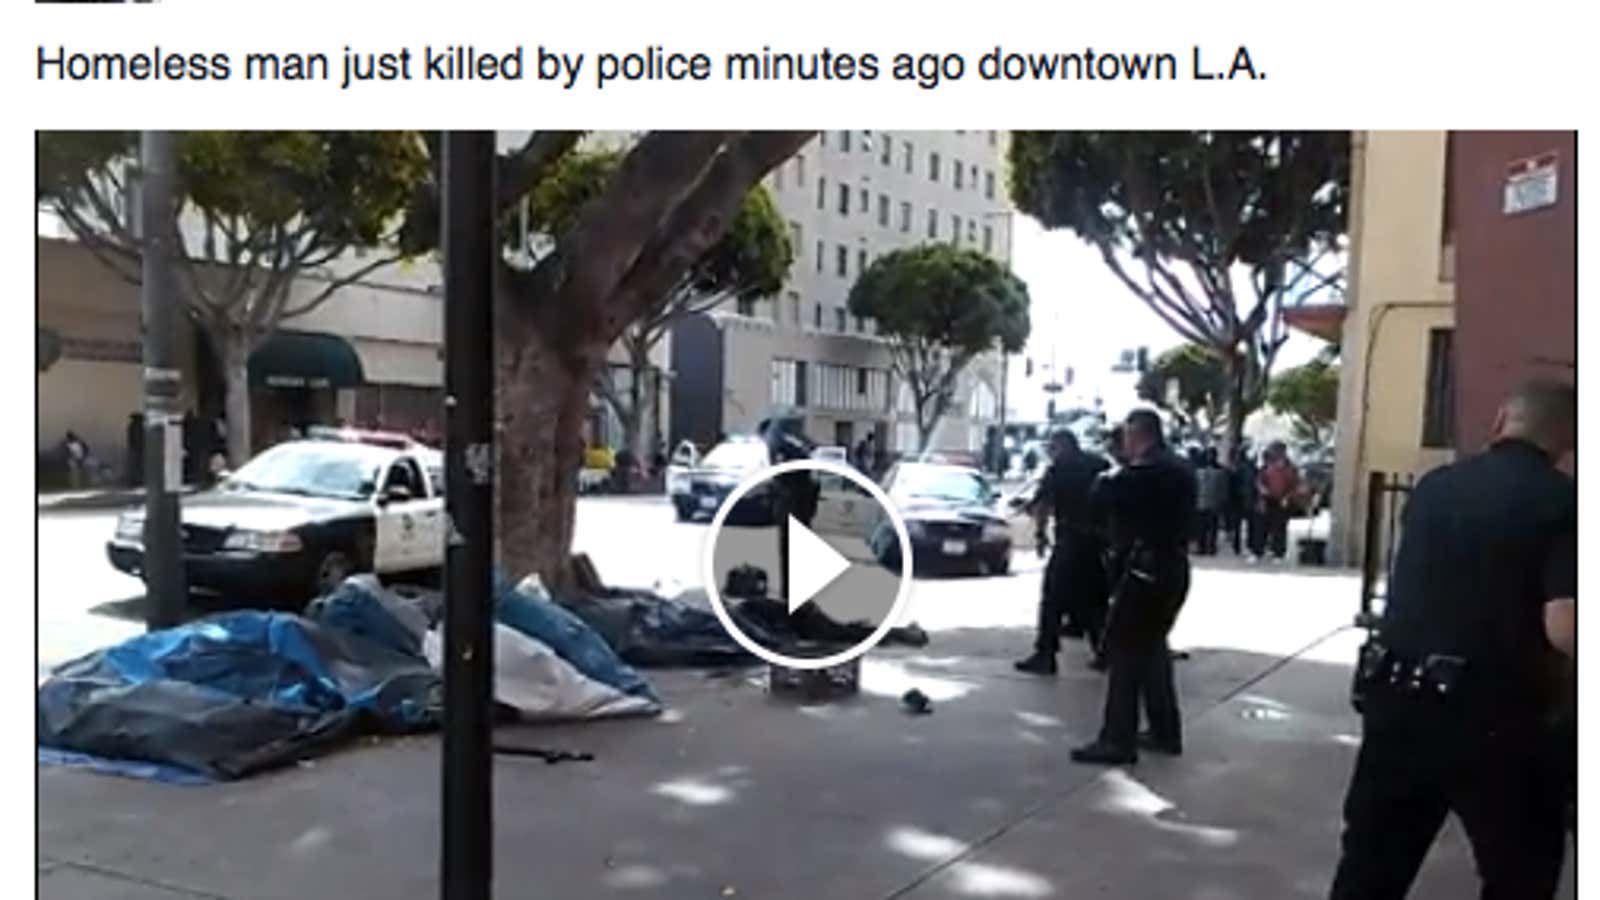 A fatal police shooting of a homeless man in Los Angeles is caught on video